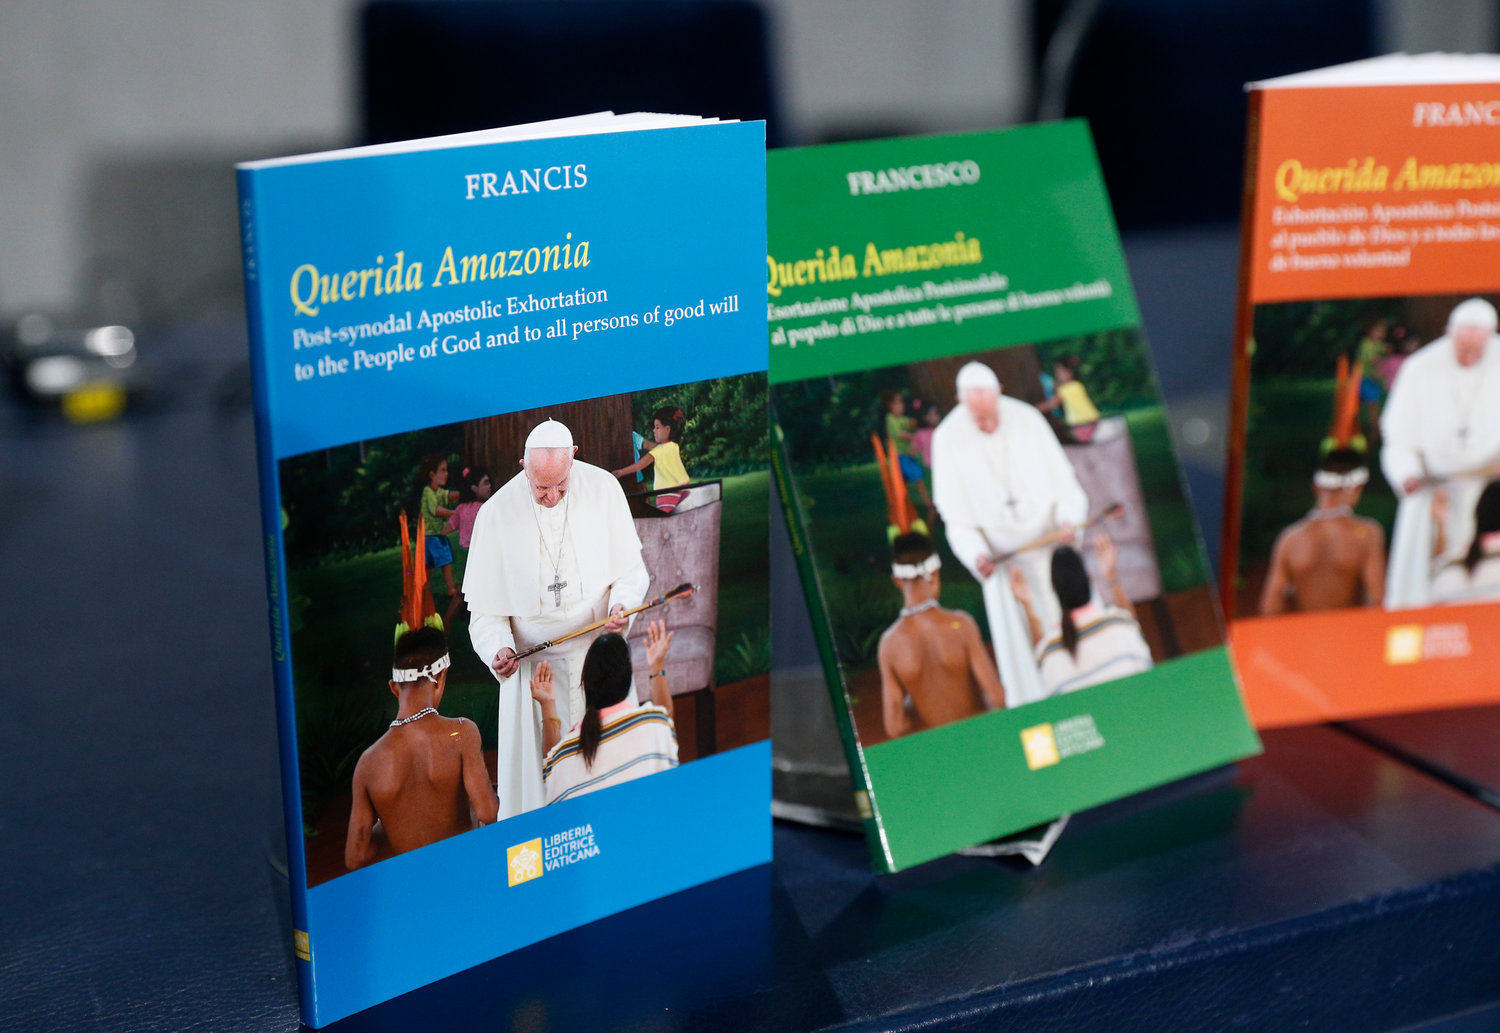 Copies of Pope Francis' apostolic exhortation, "Querida Amazonia" (Beloved Amazonia), are pictured at a news conference for the release of the exhortation at the Vatican Feb. 12, 2020. The document contains the pope's conclusions from the 2019 Synod of Bishops for the Amazon.